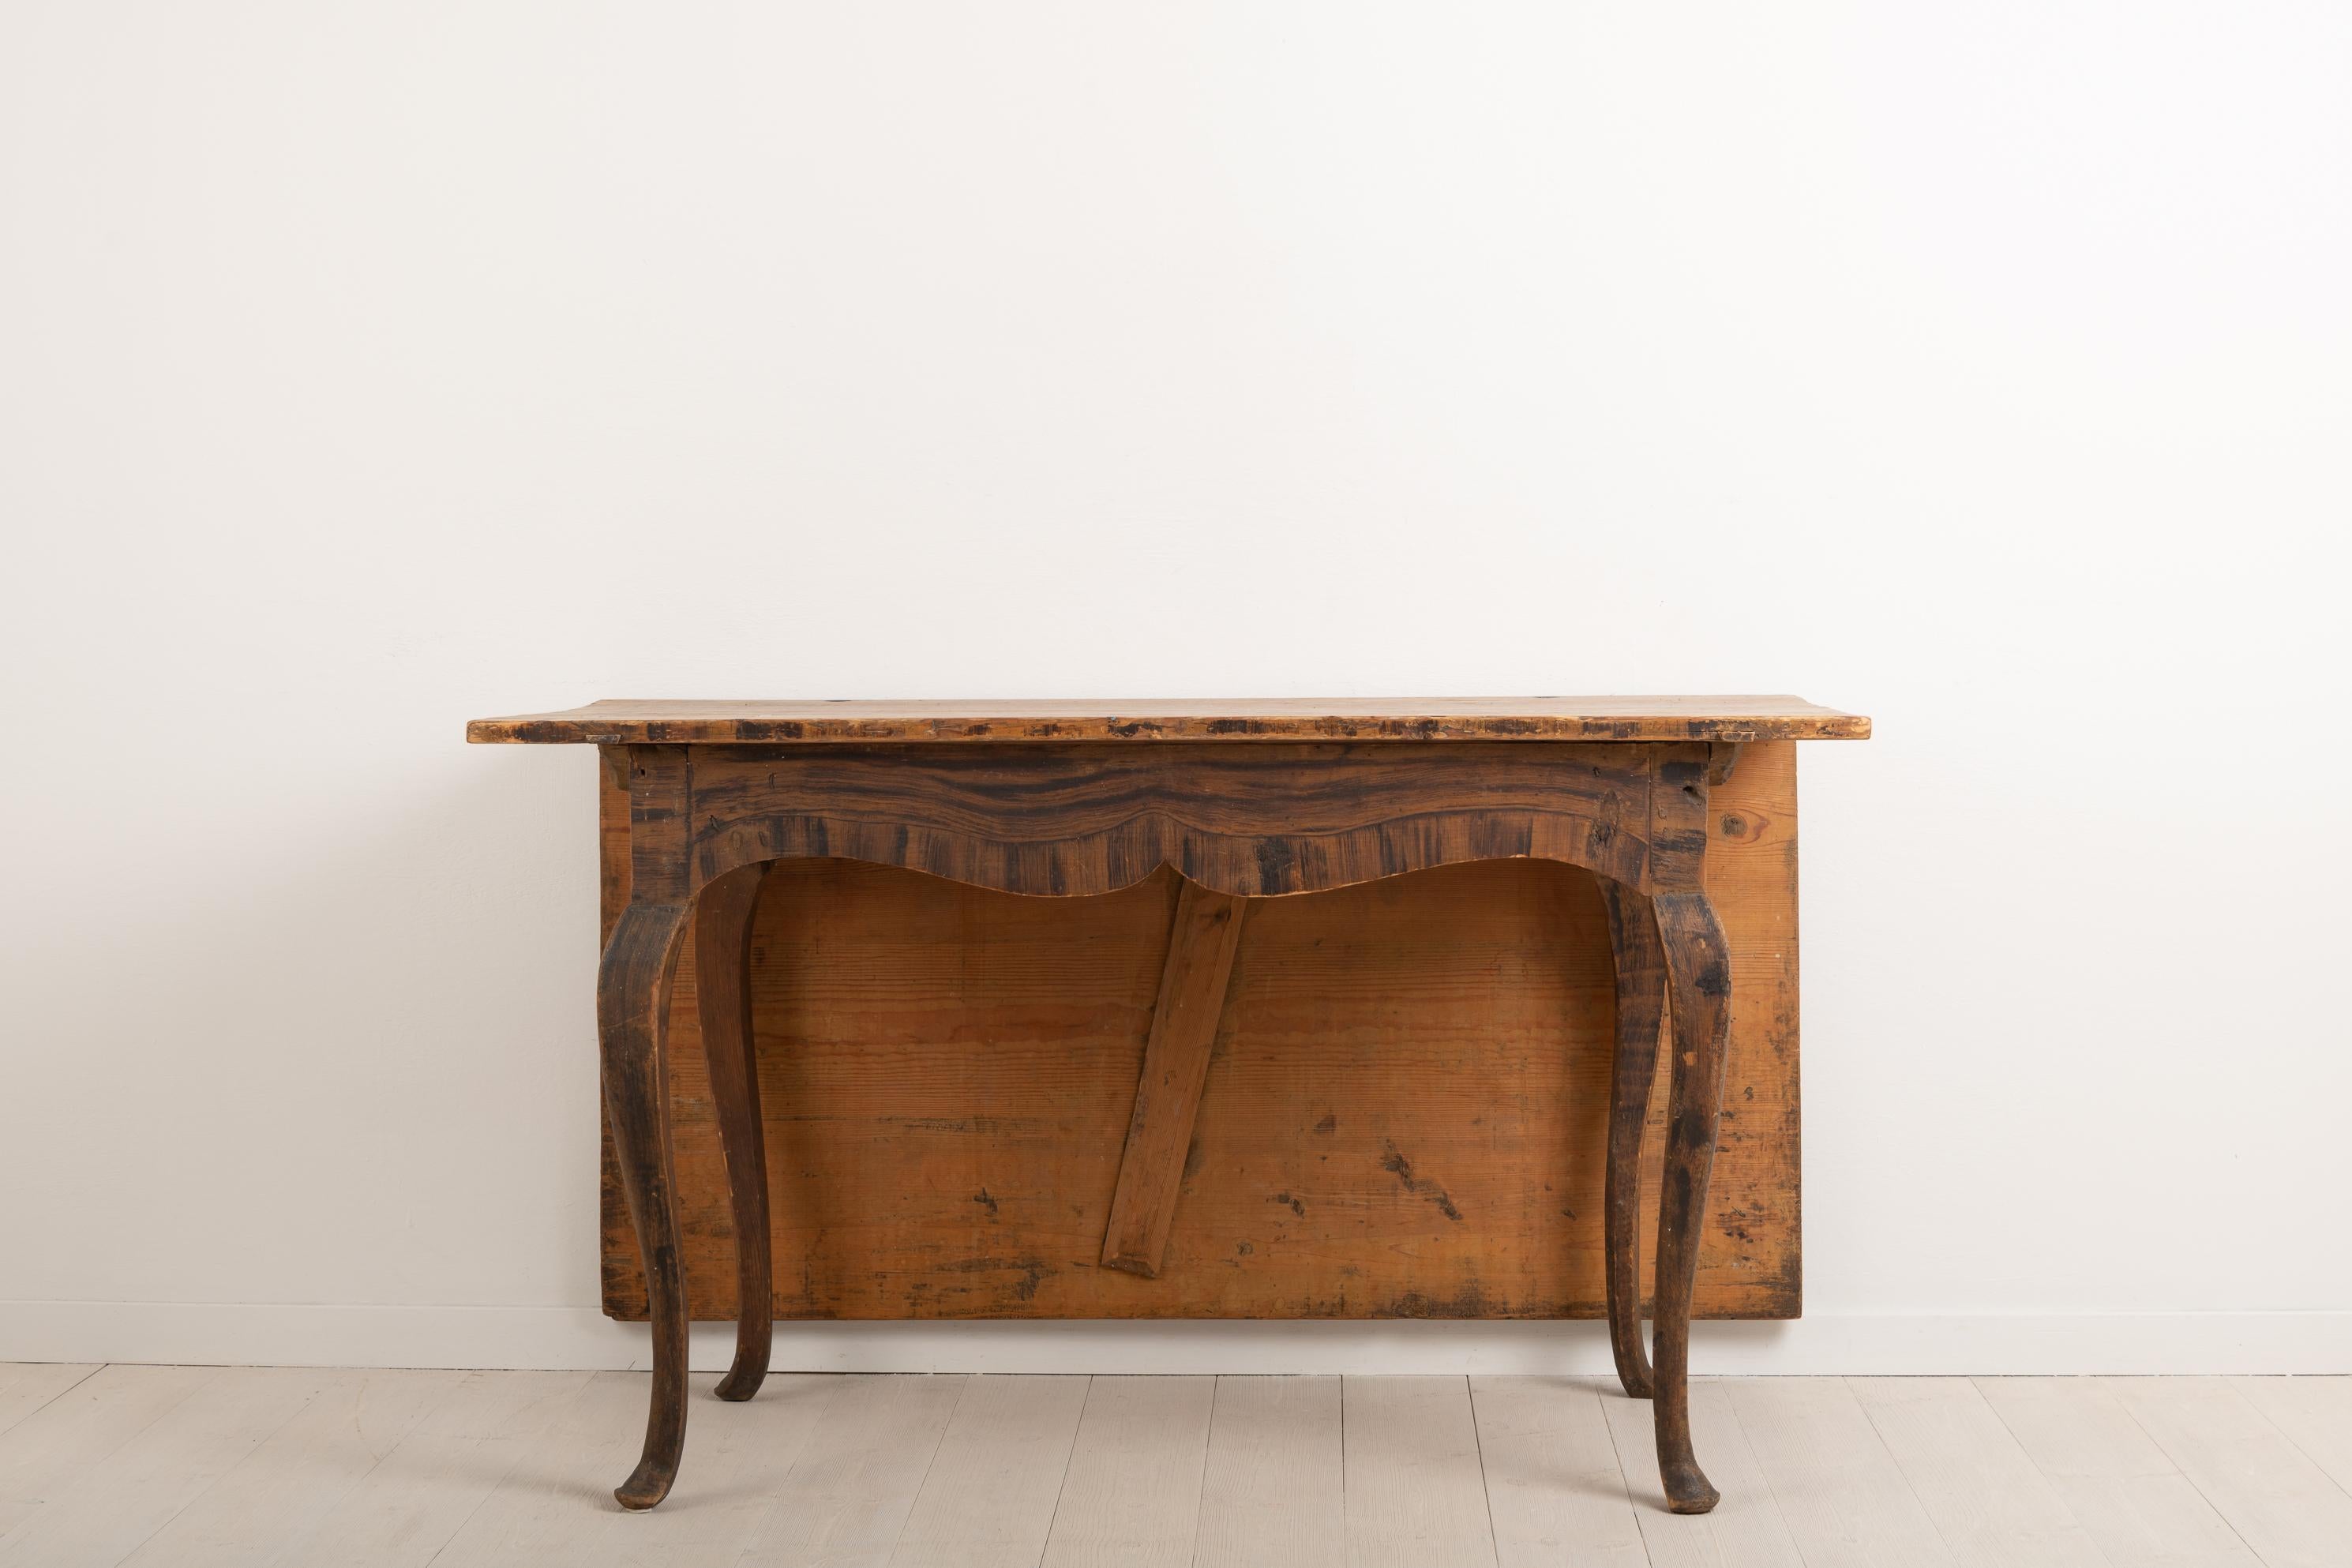 Hand-Crafted Mid-18th Century Swedish Baroque Drop-Leaf Table For Sale